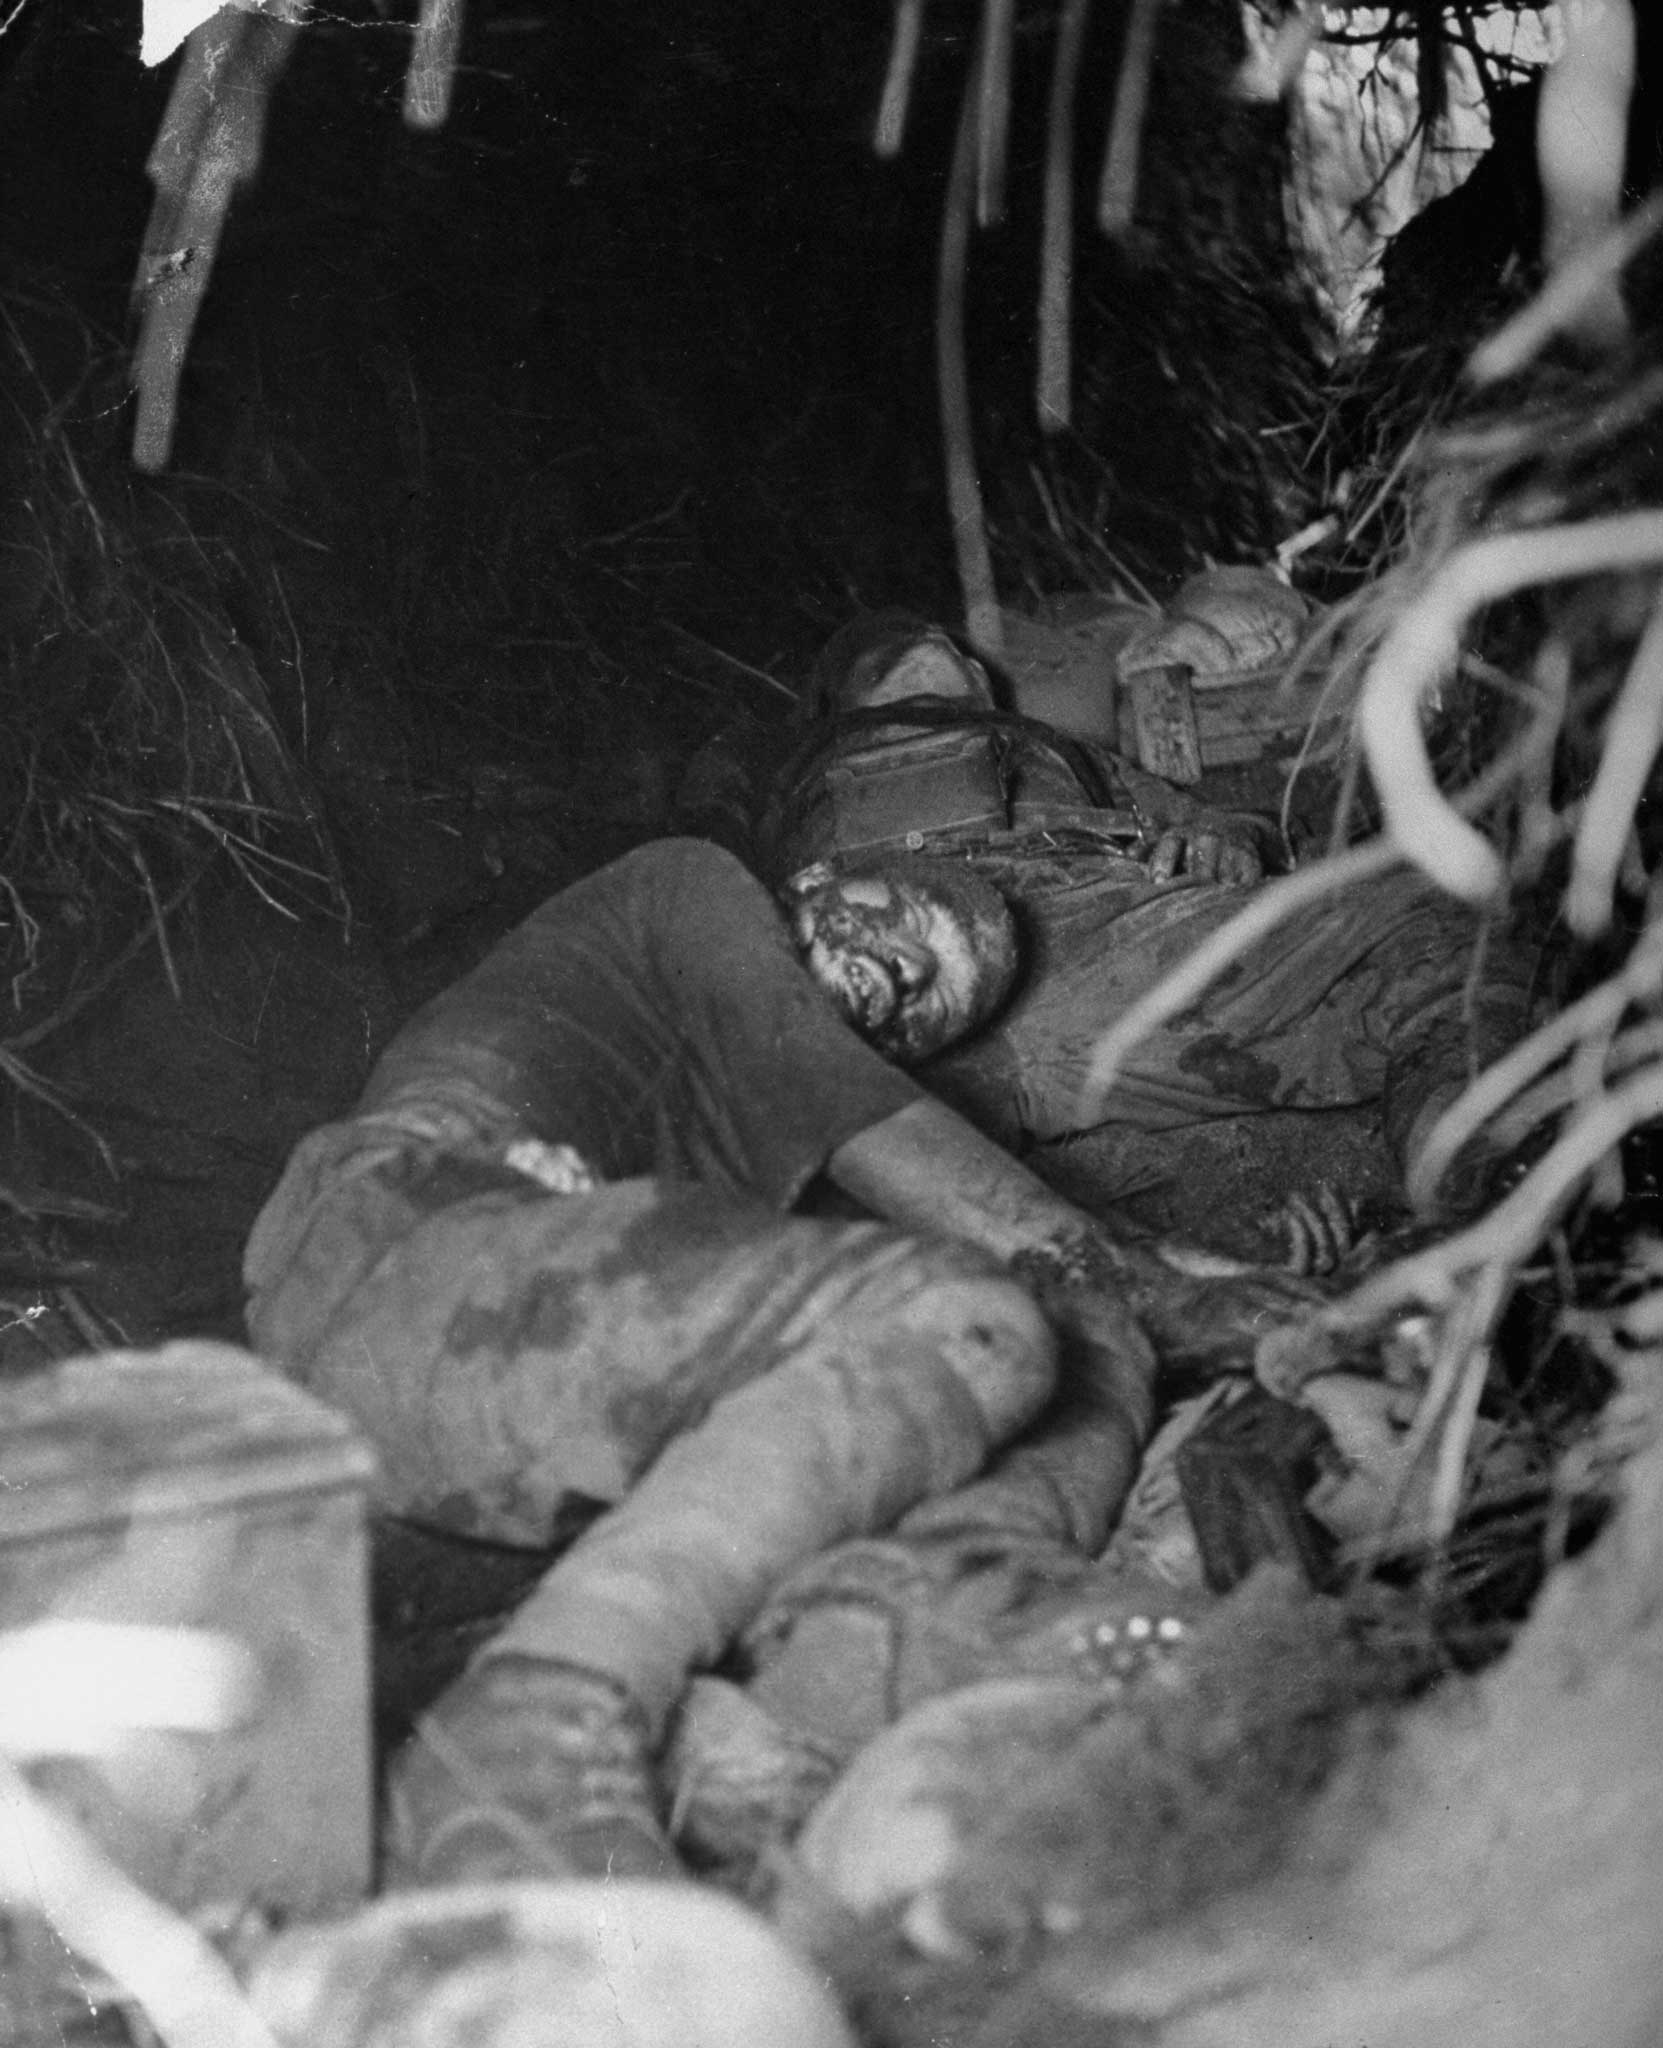 "A wounded Jap lies in a destroyed pillbox at Buna Mission. A minute later, he rose up, tried to throw a grenade which he had hidden in his left hand." (Note: The Japanese soldier was shot dead by an American officer who was standing behind Strock.)